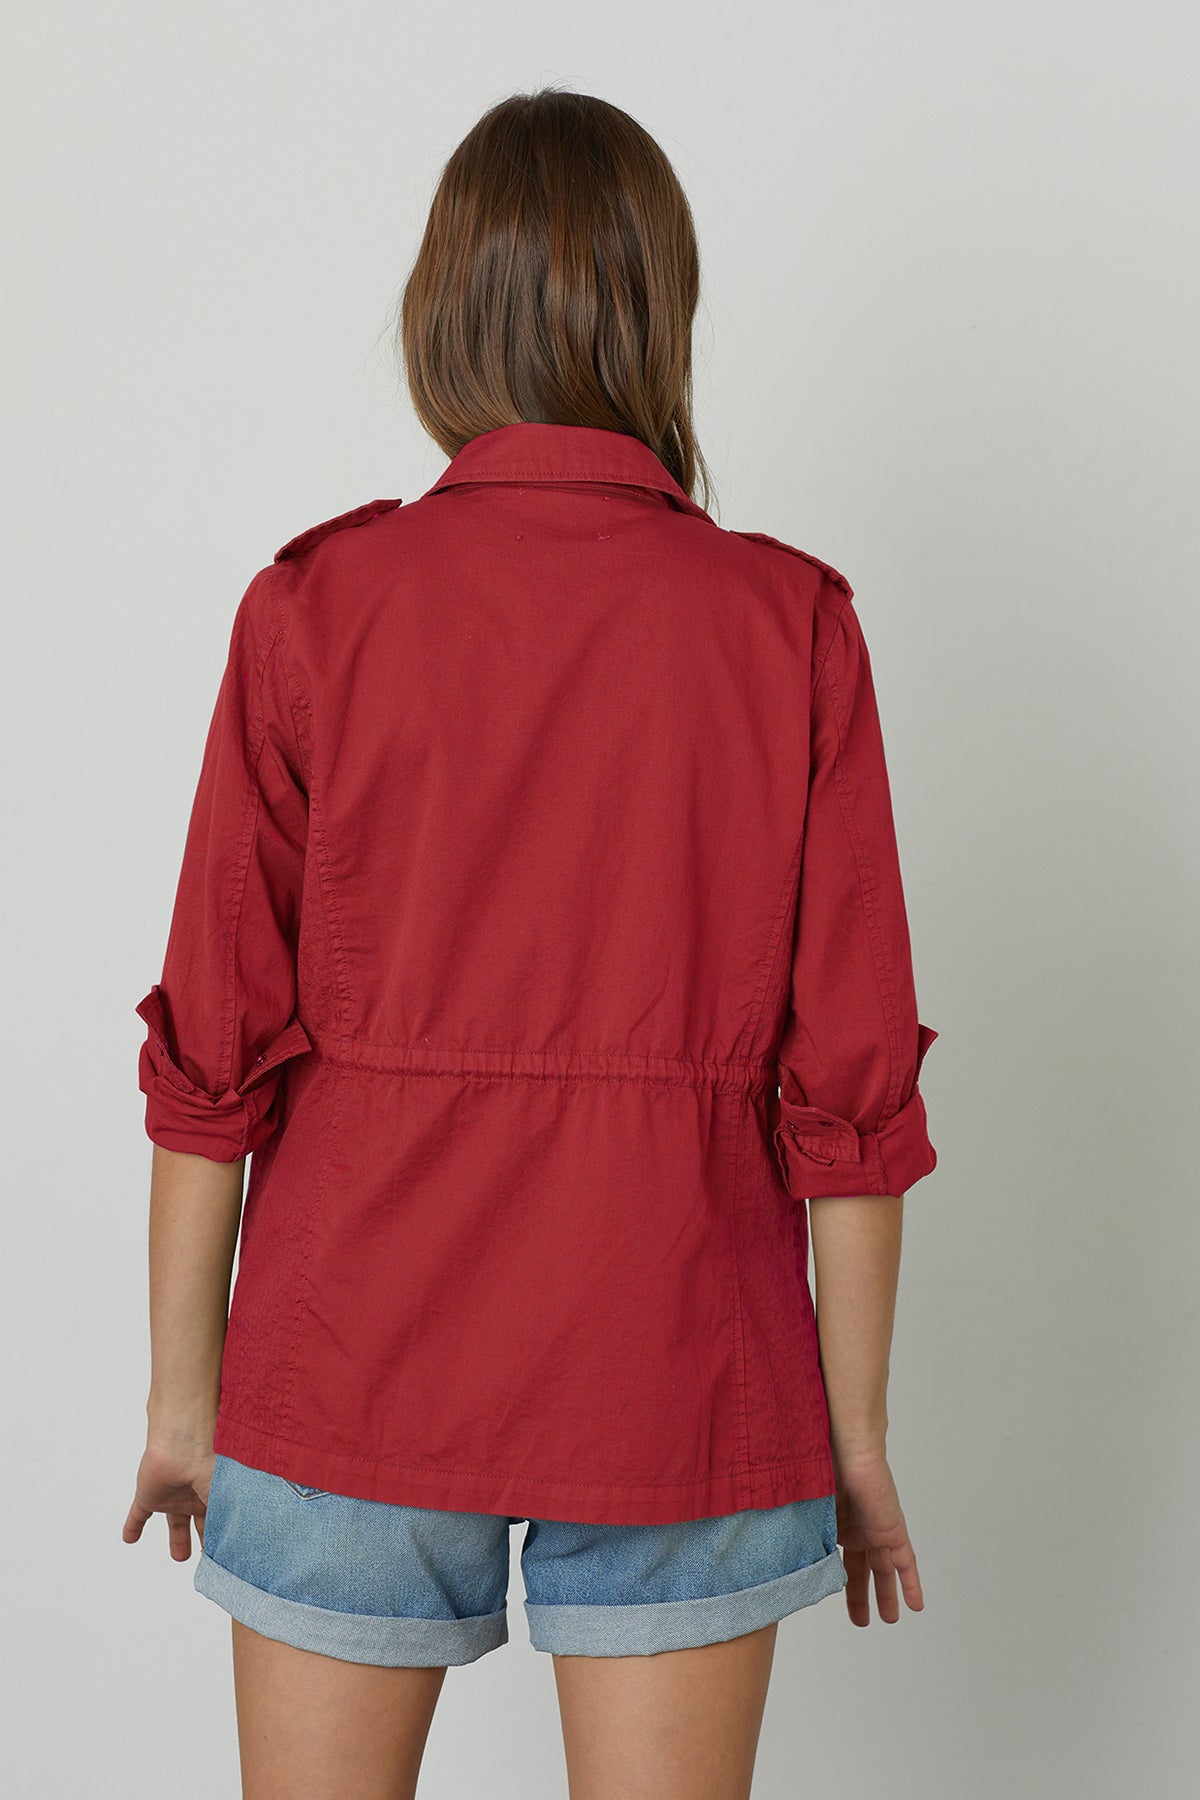 Ruby Jacket Red with Natalie Short Back-24290199830721